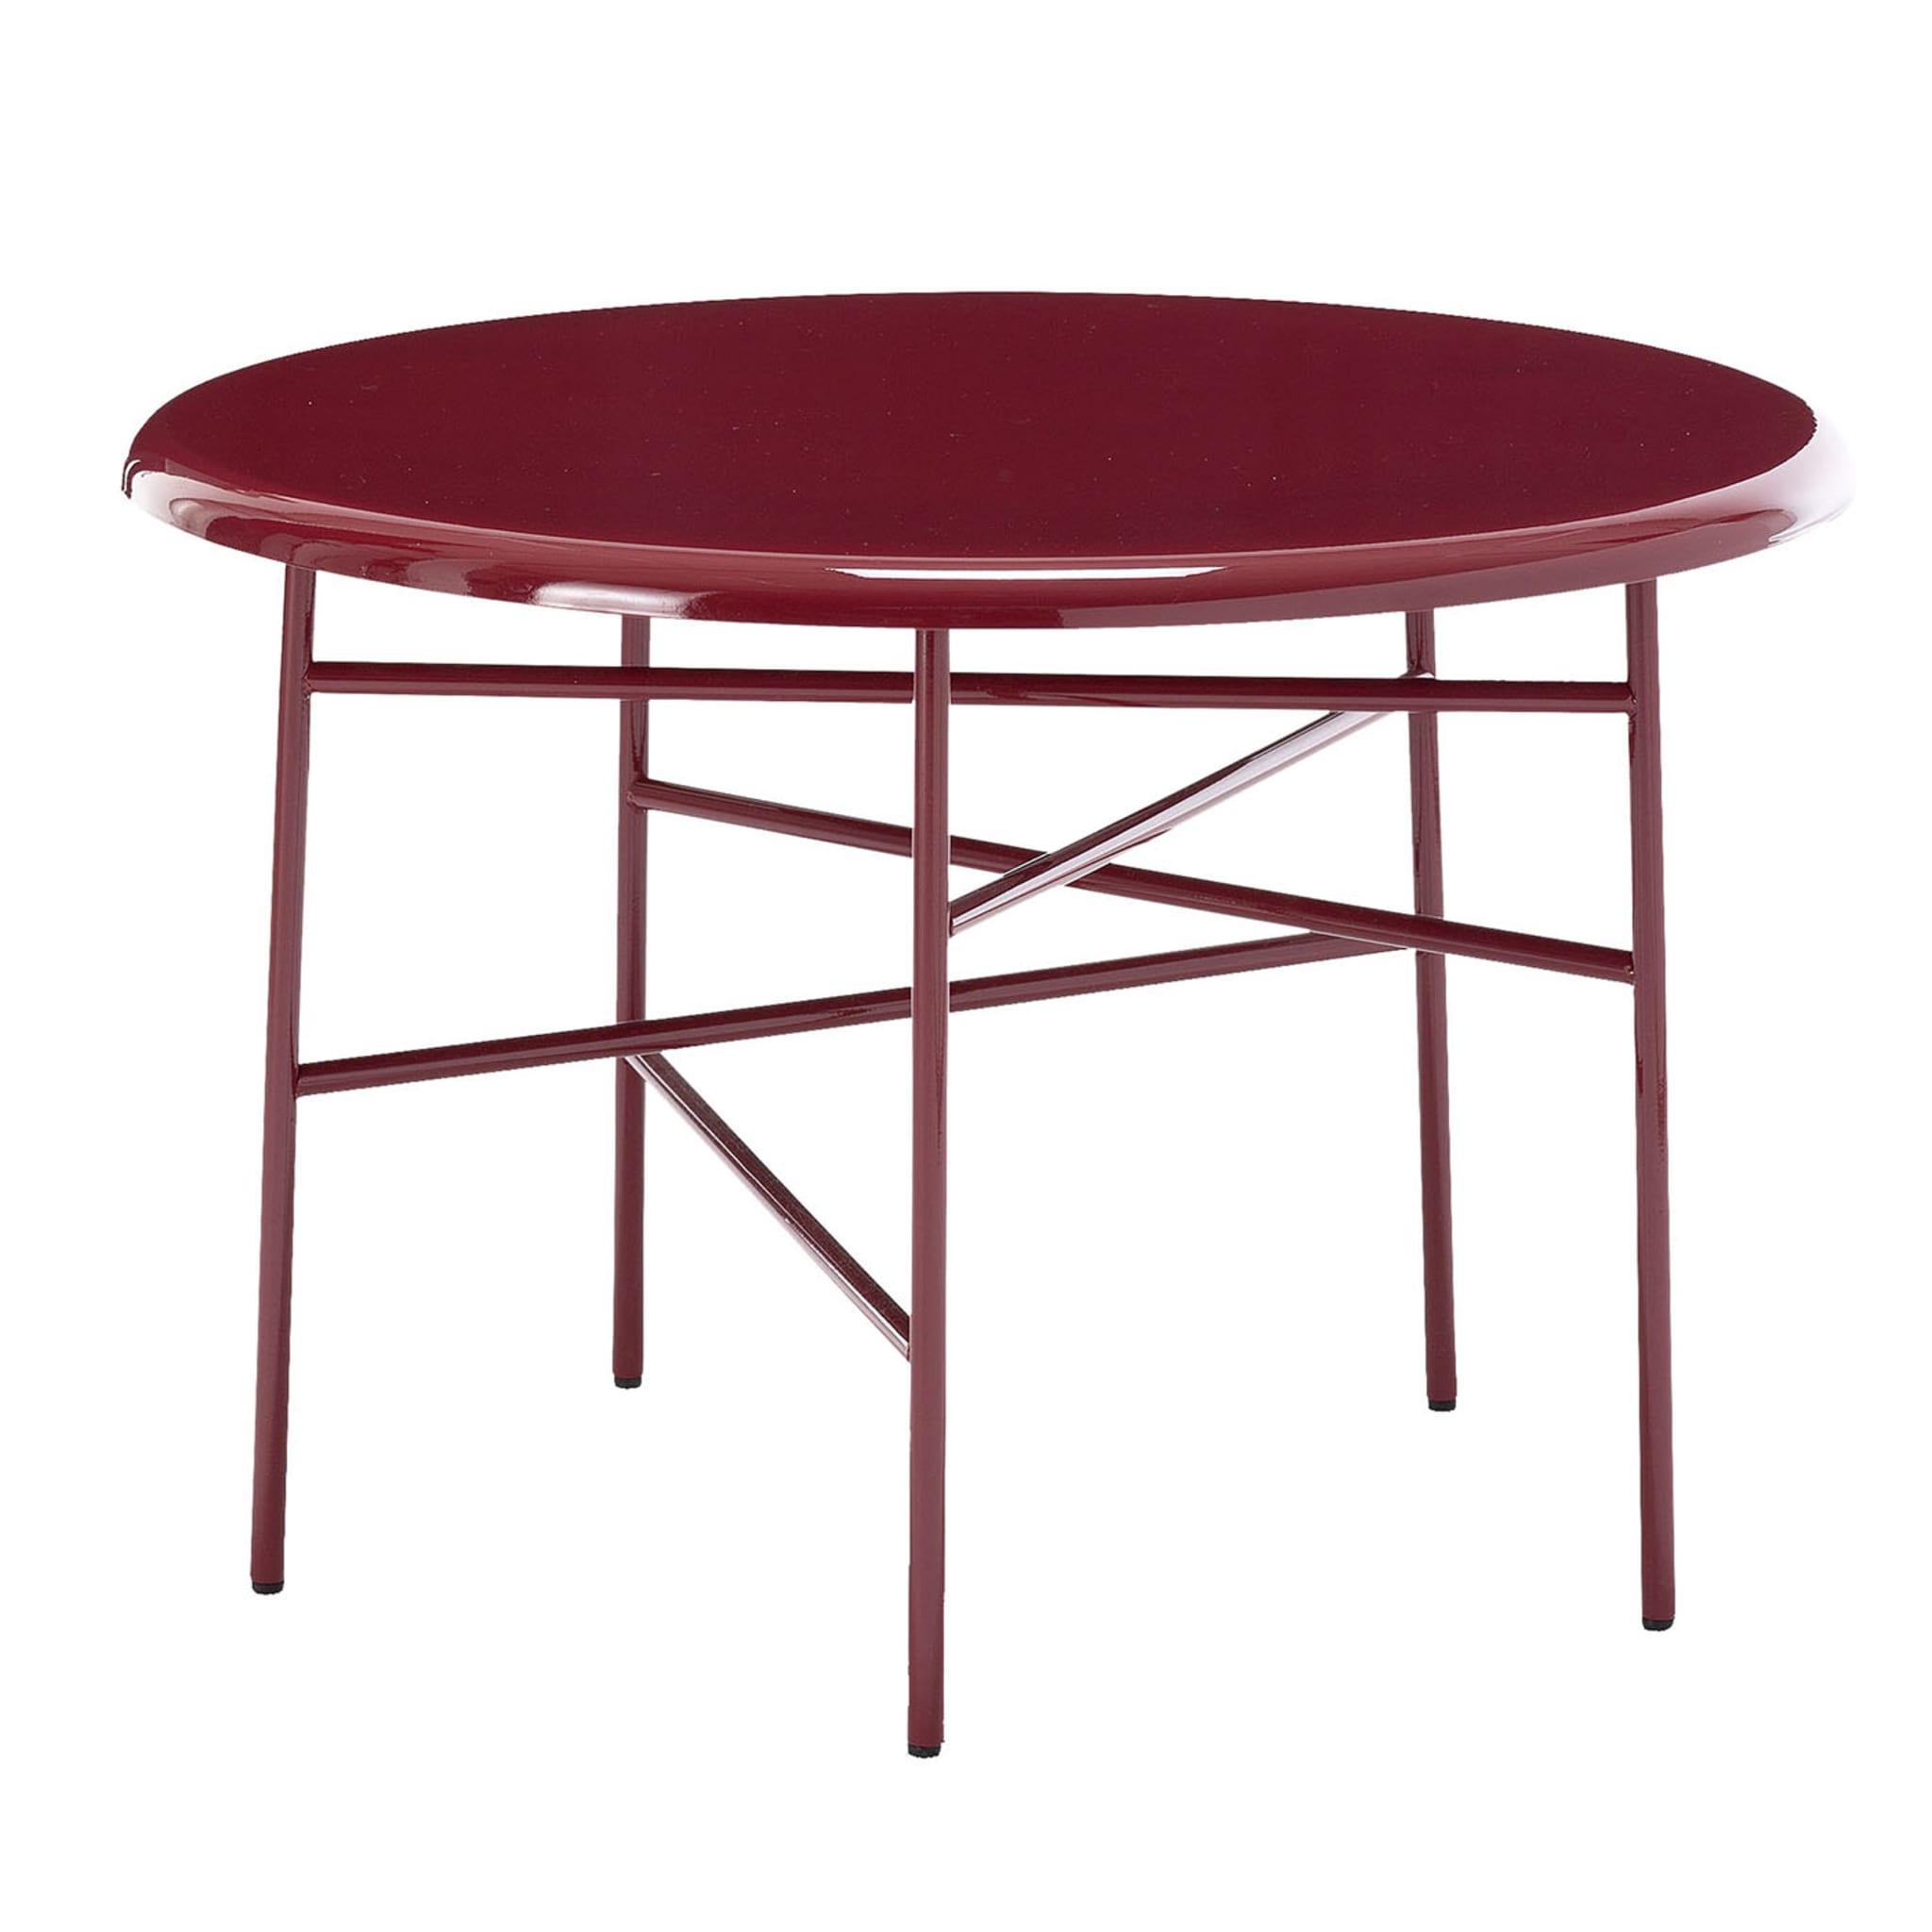 10th Star Red Glossy Lacquered Coffee Table 60 - Main view